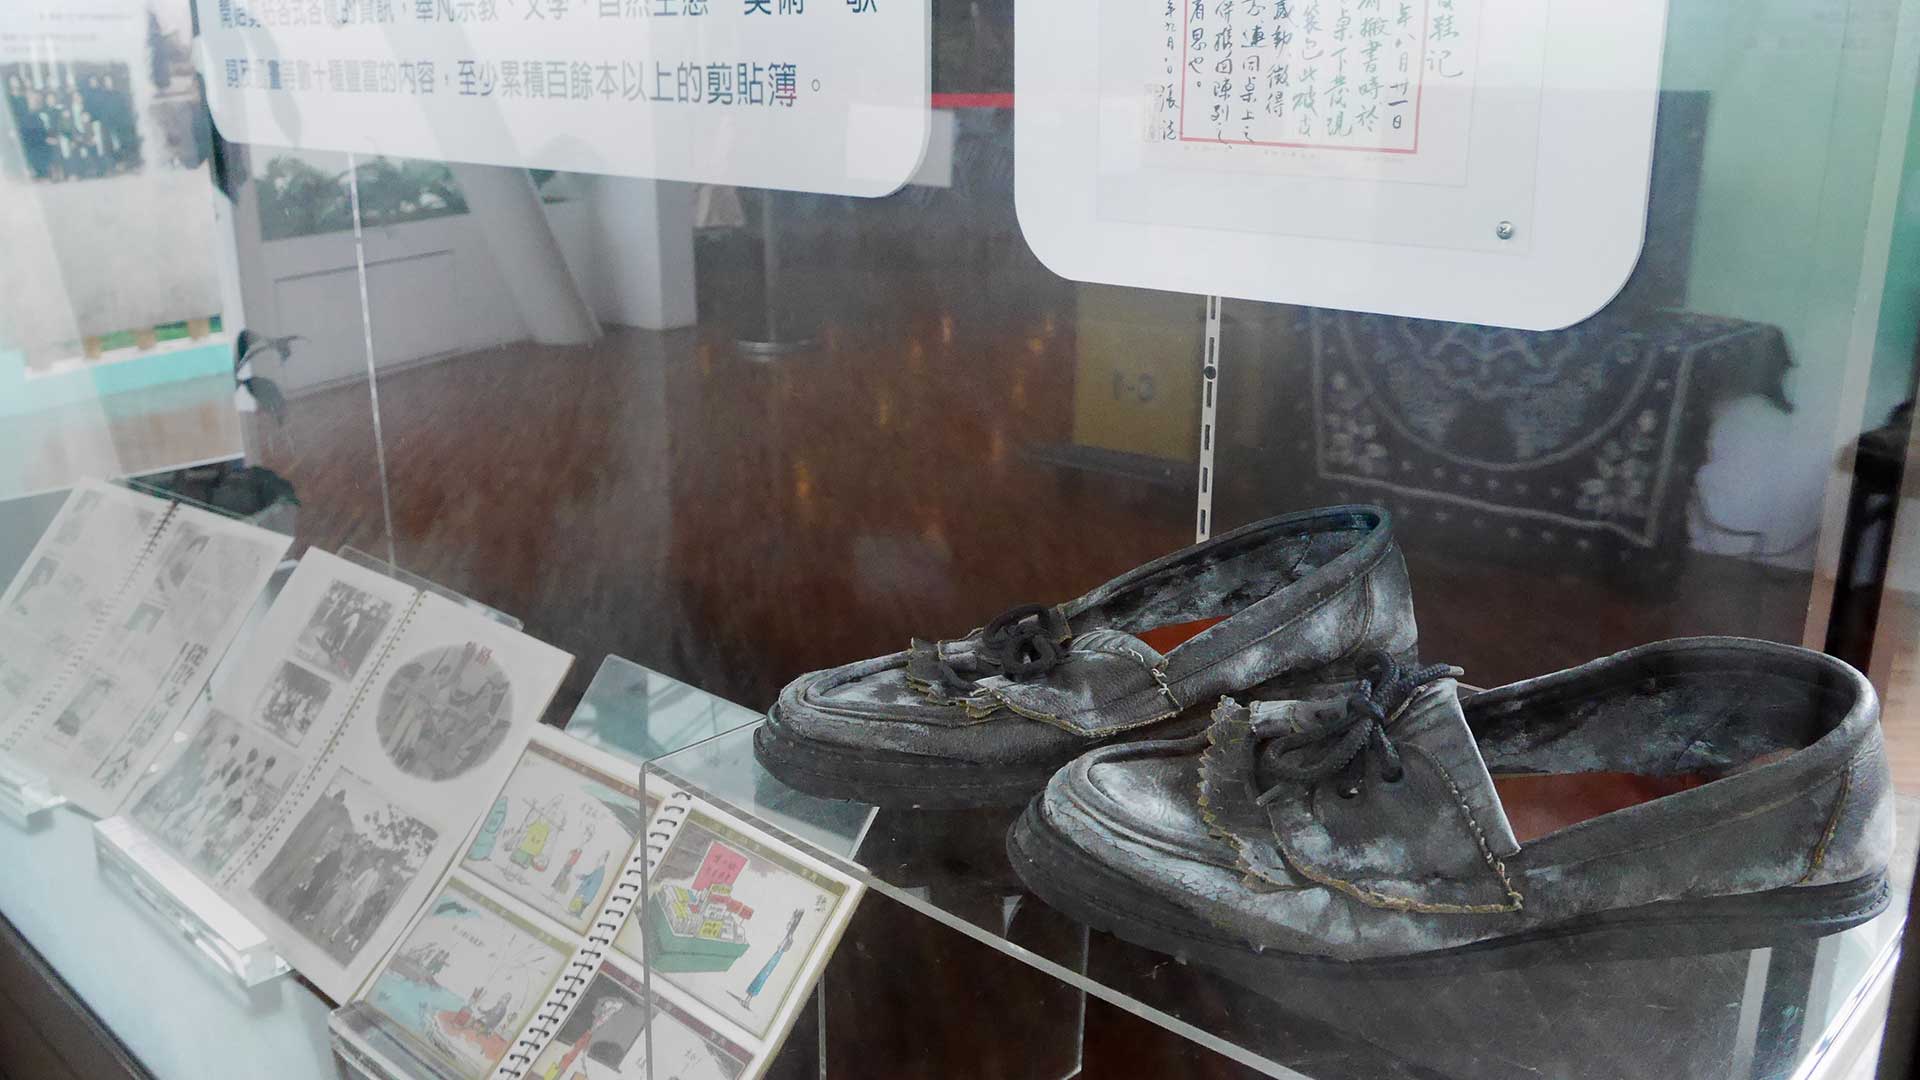 (Zhang Bing’s leather shoes)  